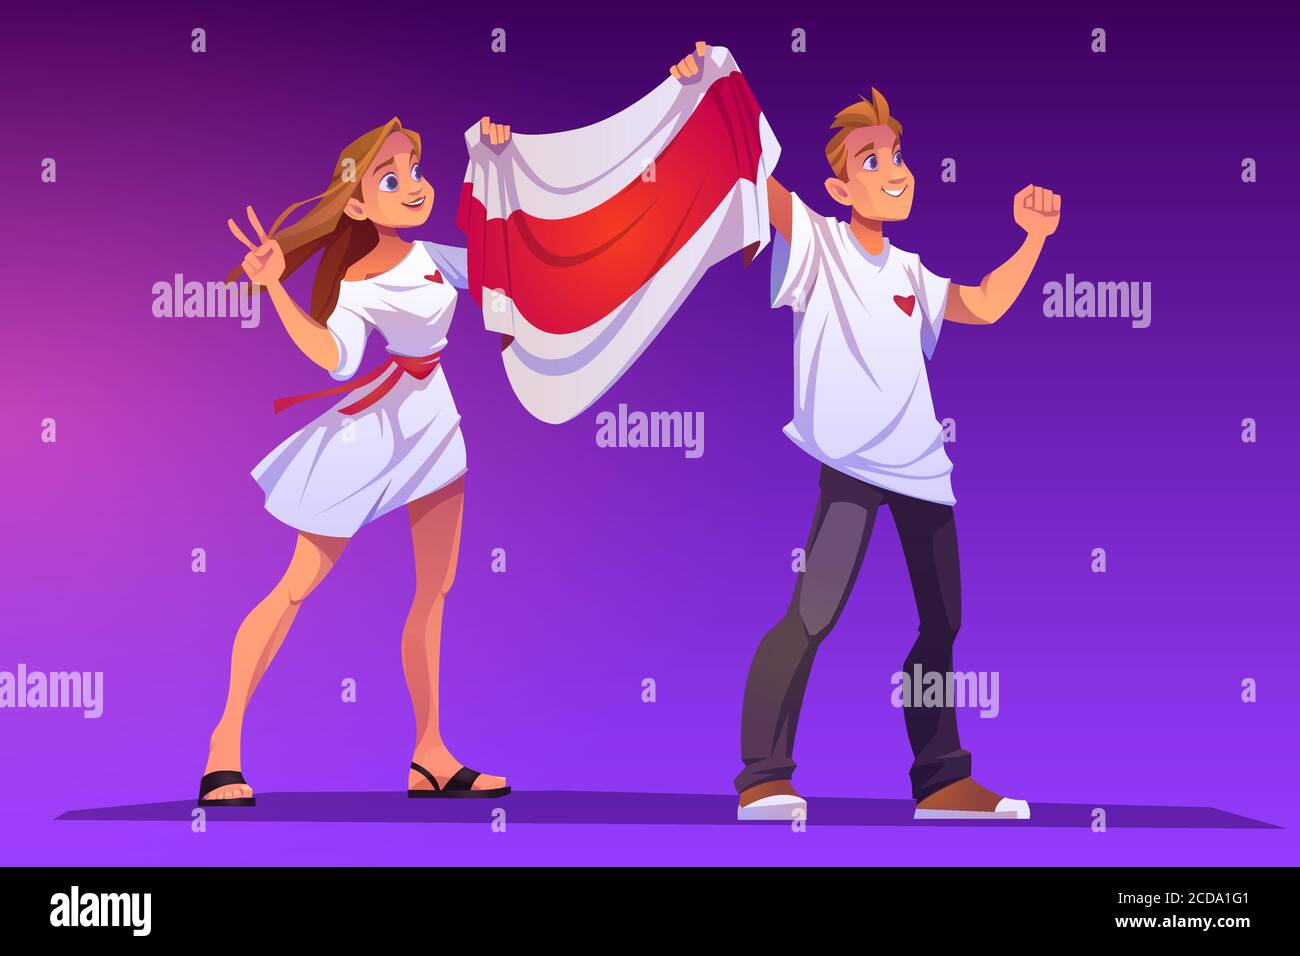 Demonstration for freedom of Belarus with opposition flag. Vector cartoon illustration with people holding white-red-white flag on political rally. Protest from dictatorship, support for human rights Stock Vector